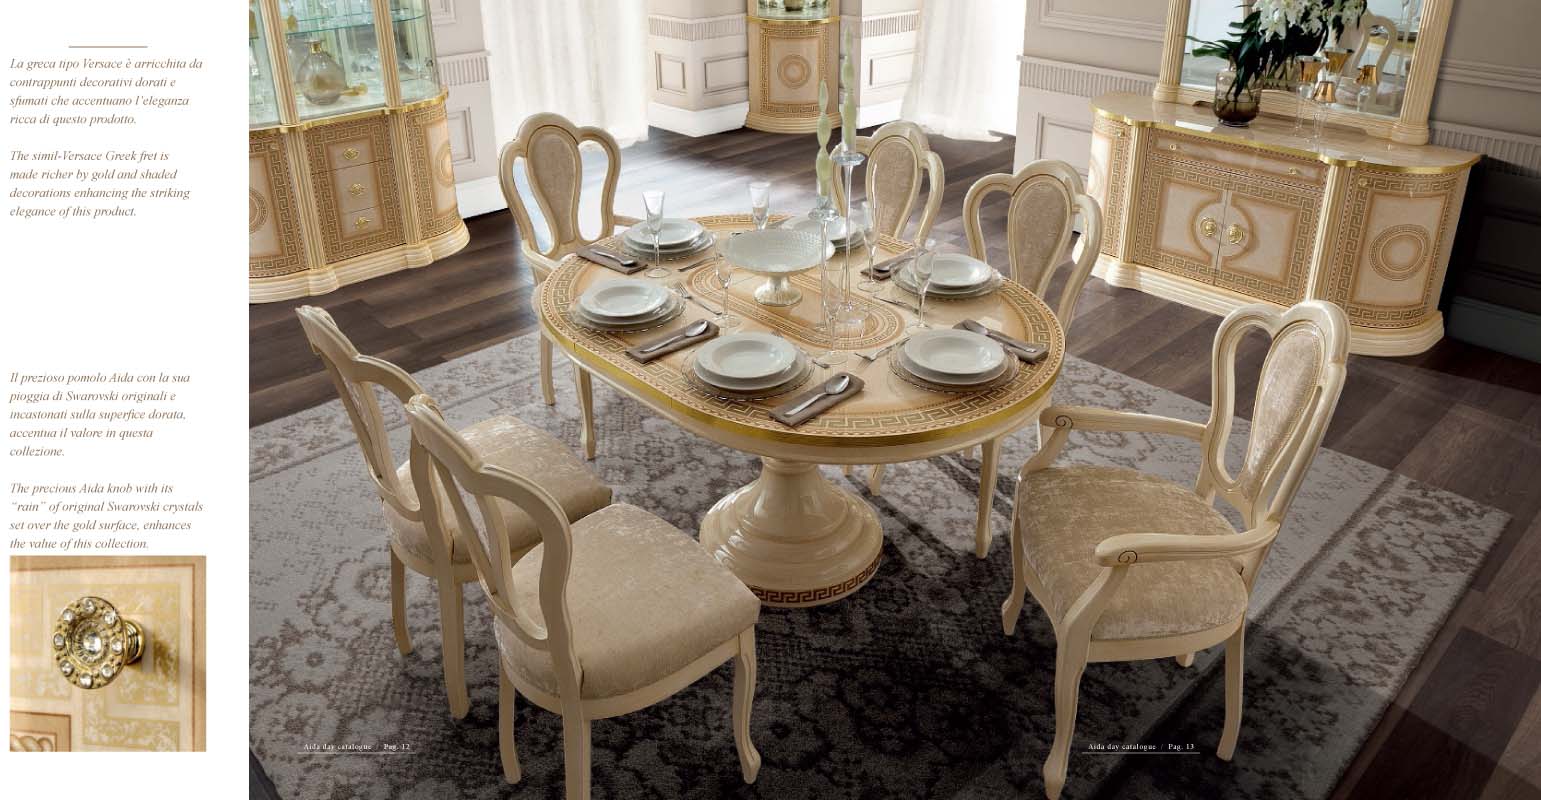 Aida Dining Classic Formal Dining Sets Dining Room Furniture